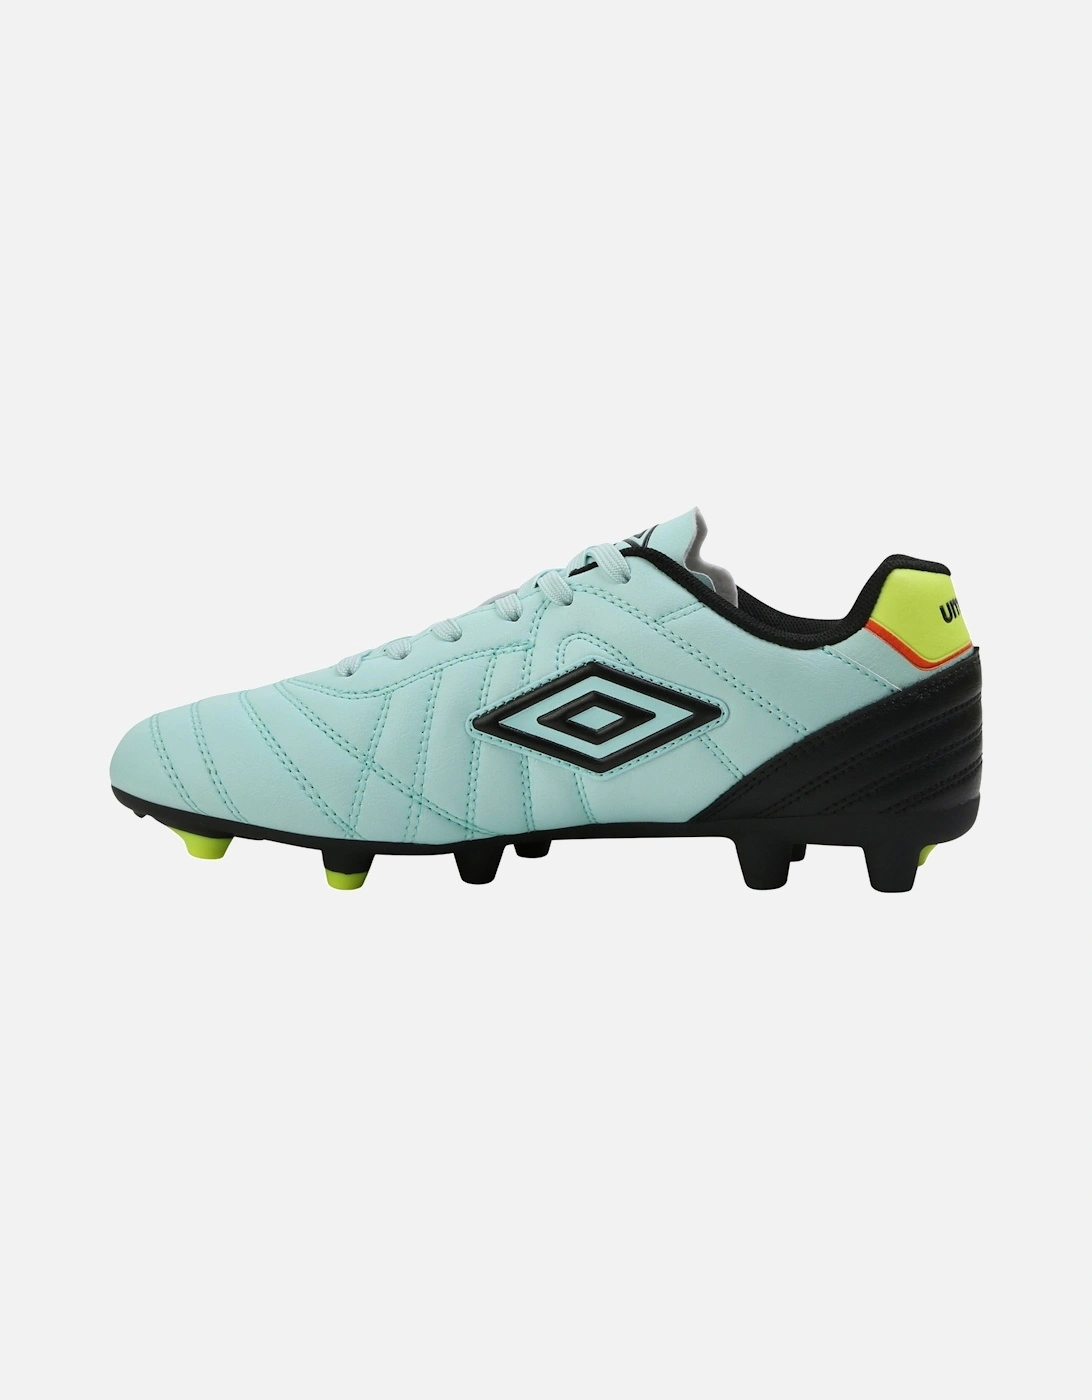 Unisex Adult Firm Ground Football Boots